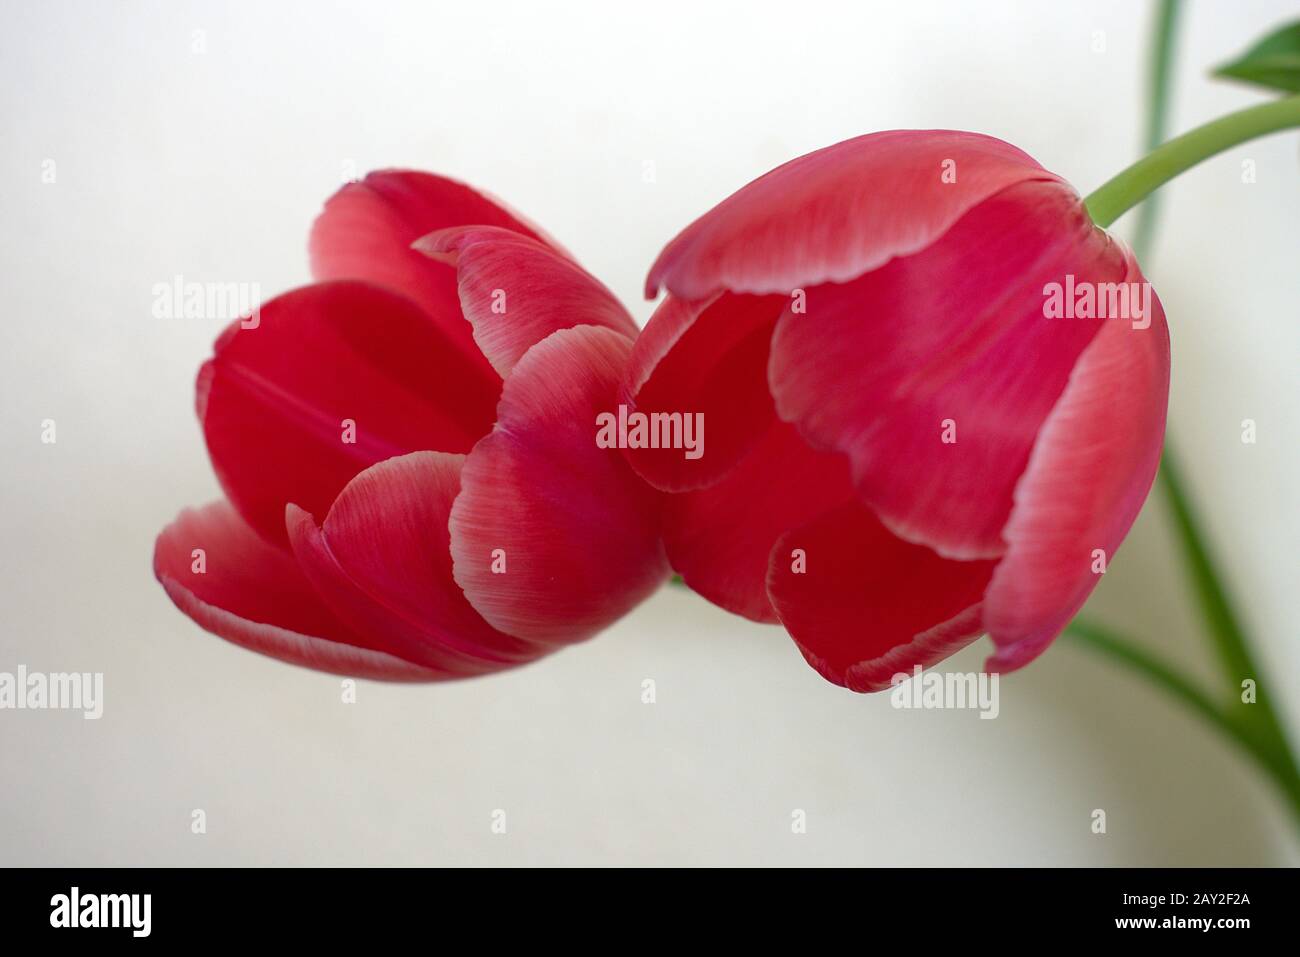 Closeup view of two tulips Growing in the Same Direction with A Light Background Stock Photo